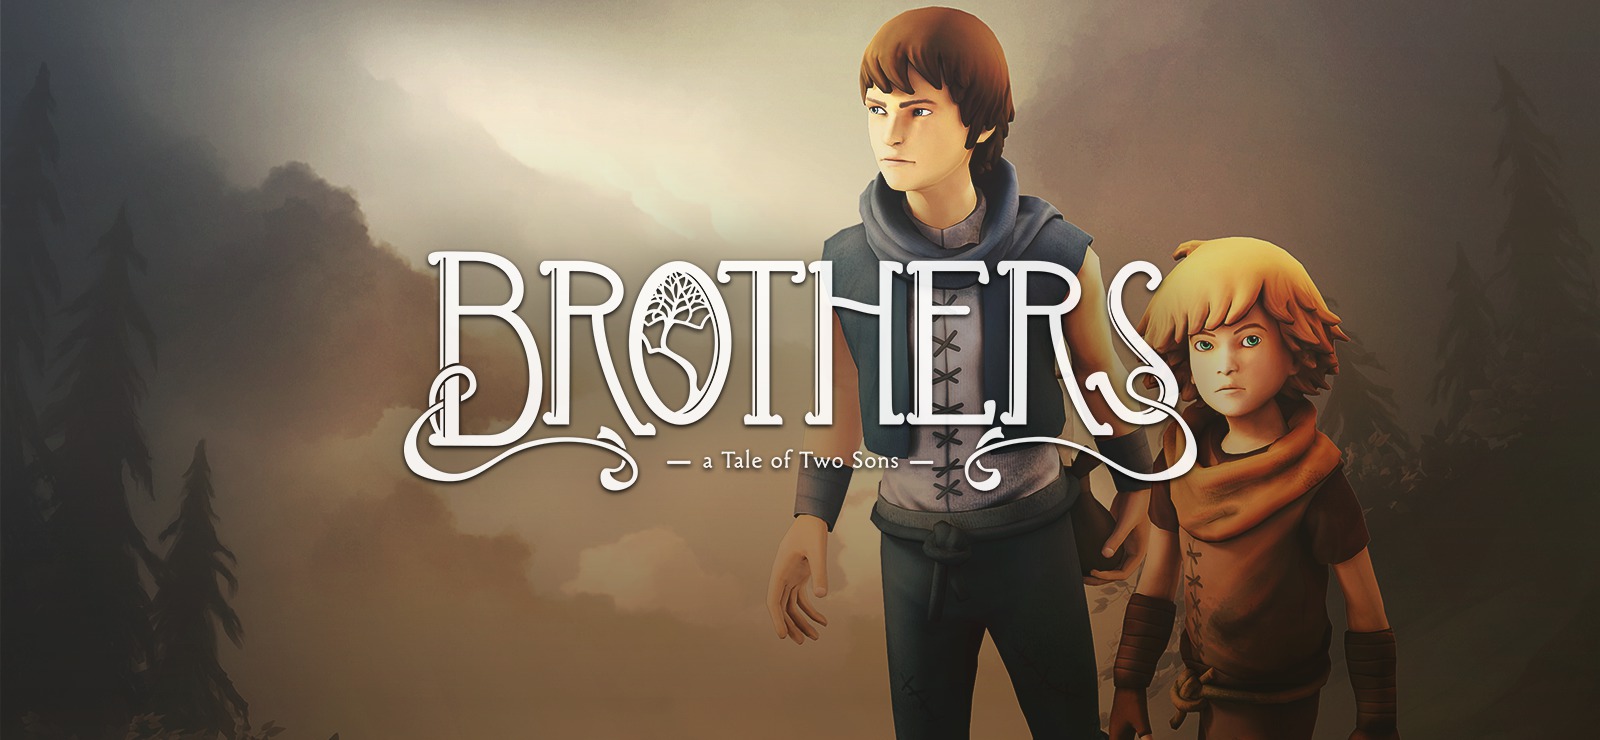 Brothers - A Tale of Two Sons #4 (упоротое прохождение).